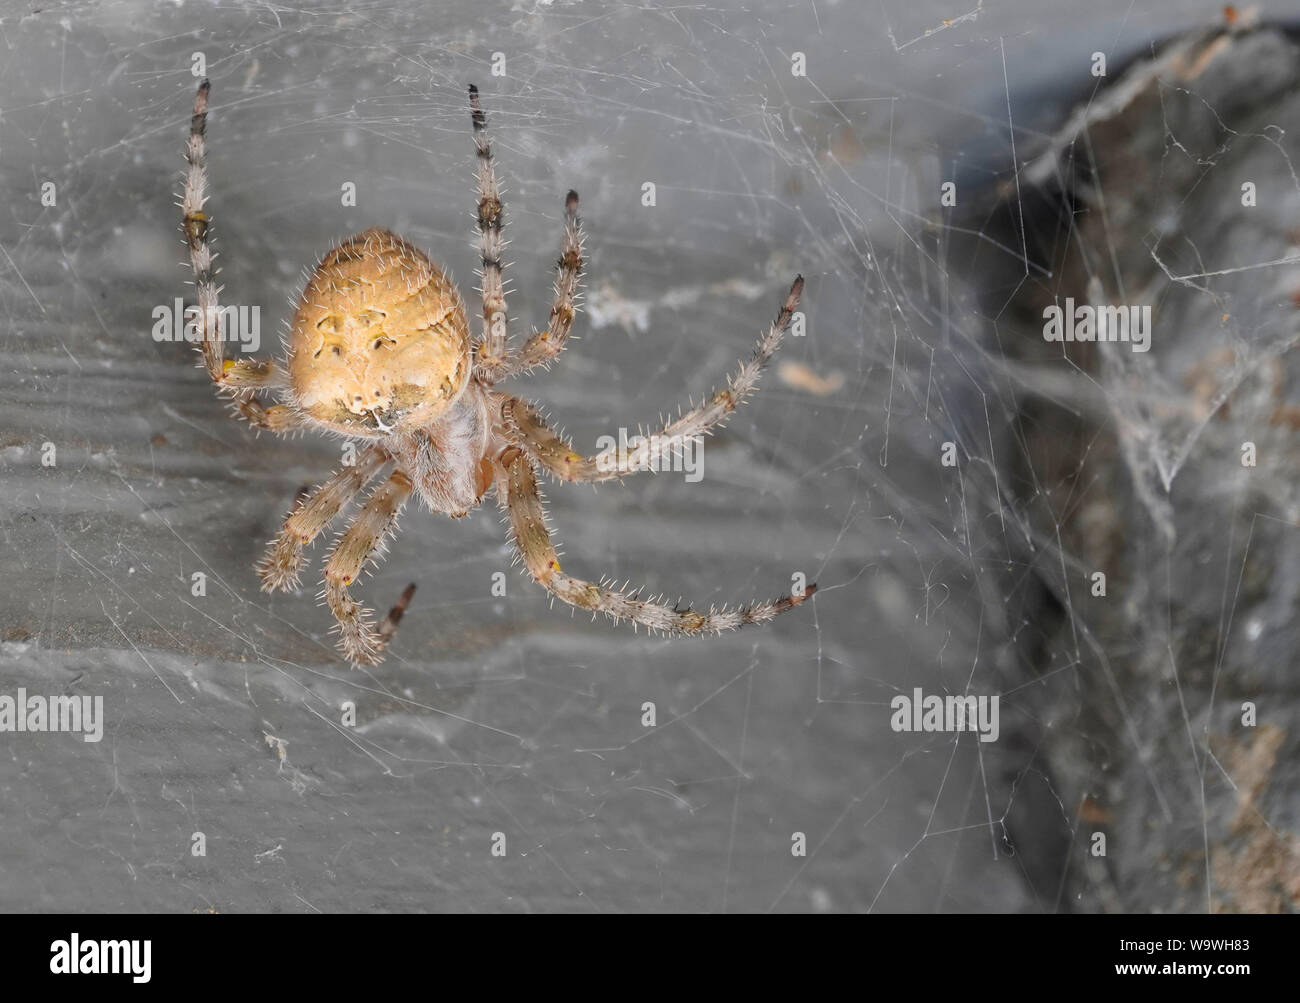 A very large Orb spider deciding to take a web walk during the early morning. Stock Photo